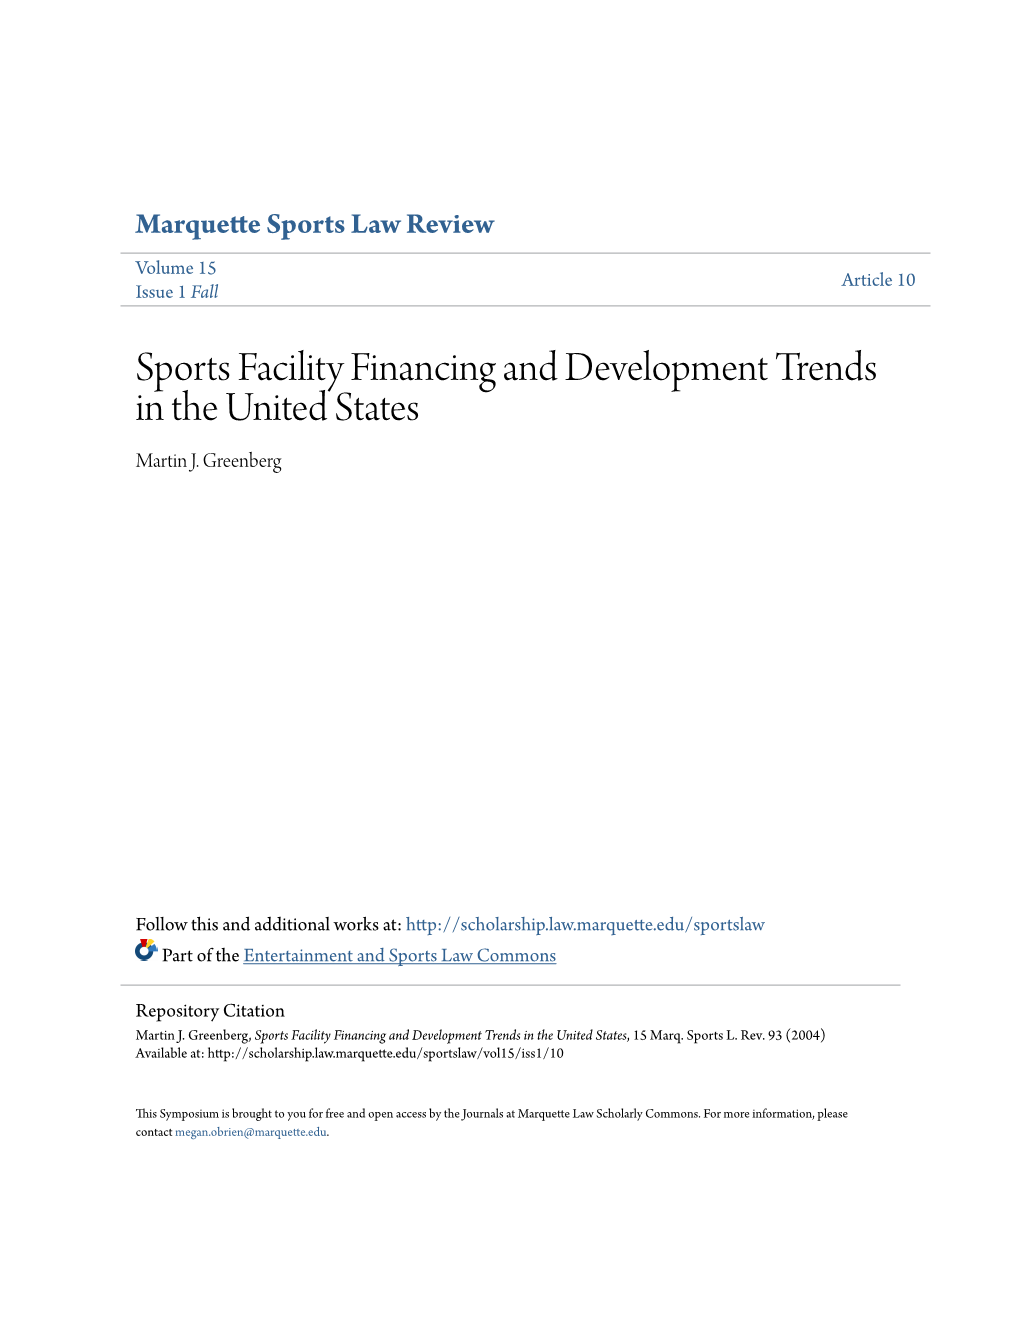 Sports Facility Financing and Development Trends in the United States Martin J